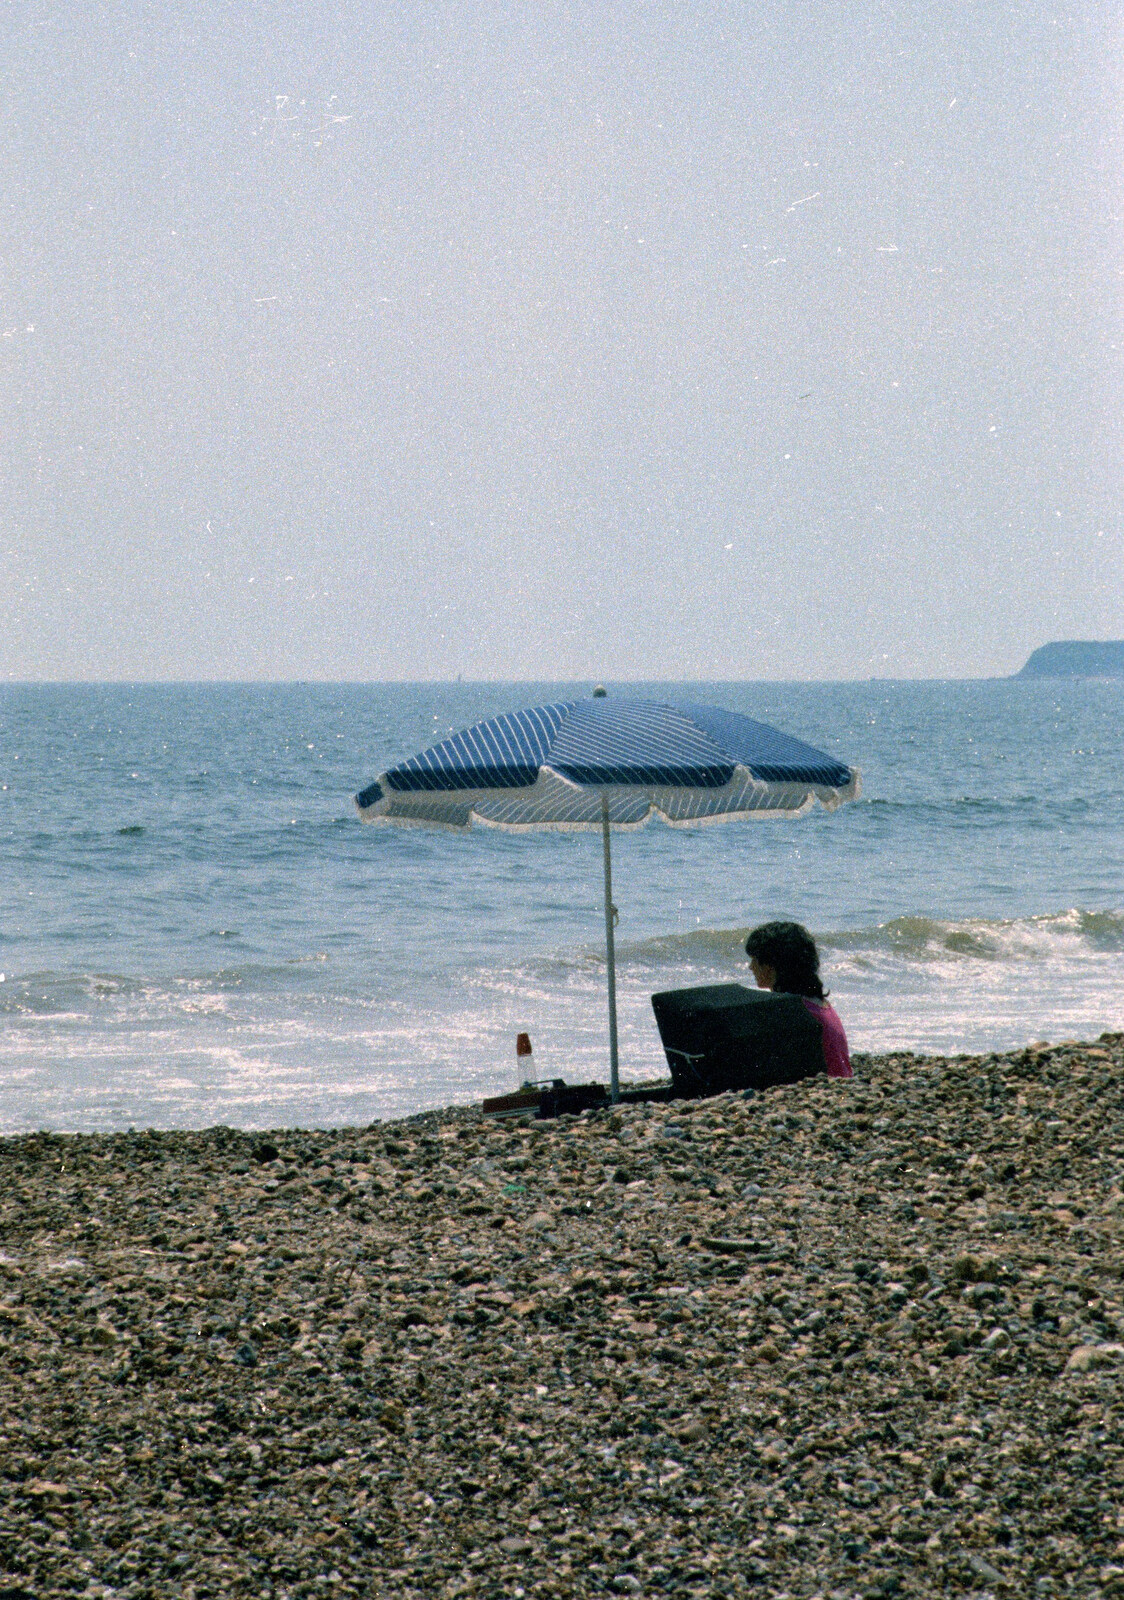 Beach umbrella from A Ford Cottage Miscellany, Barton on Sea, Hampshire - 7th July 1986